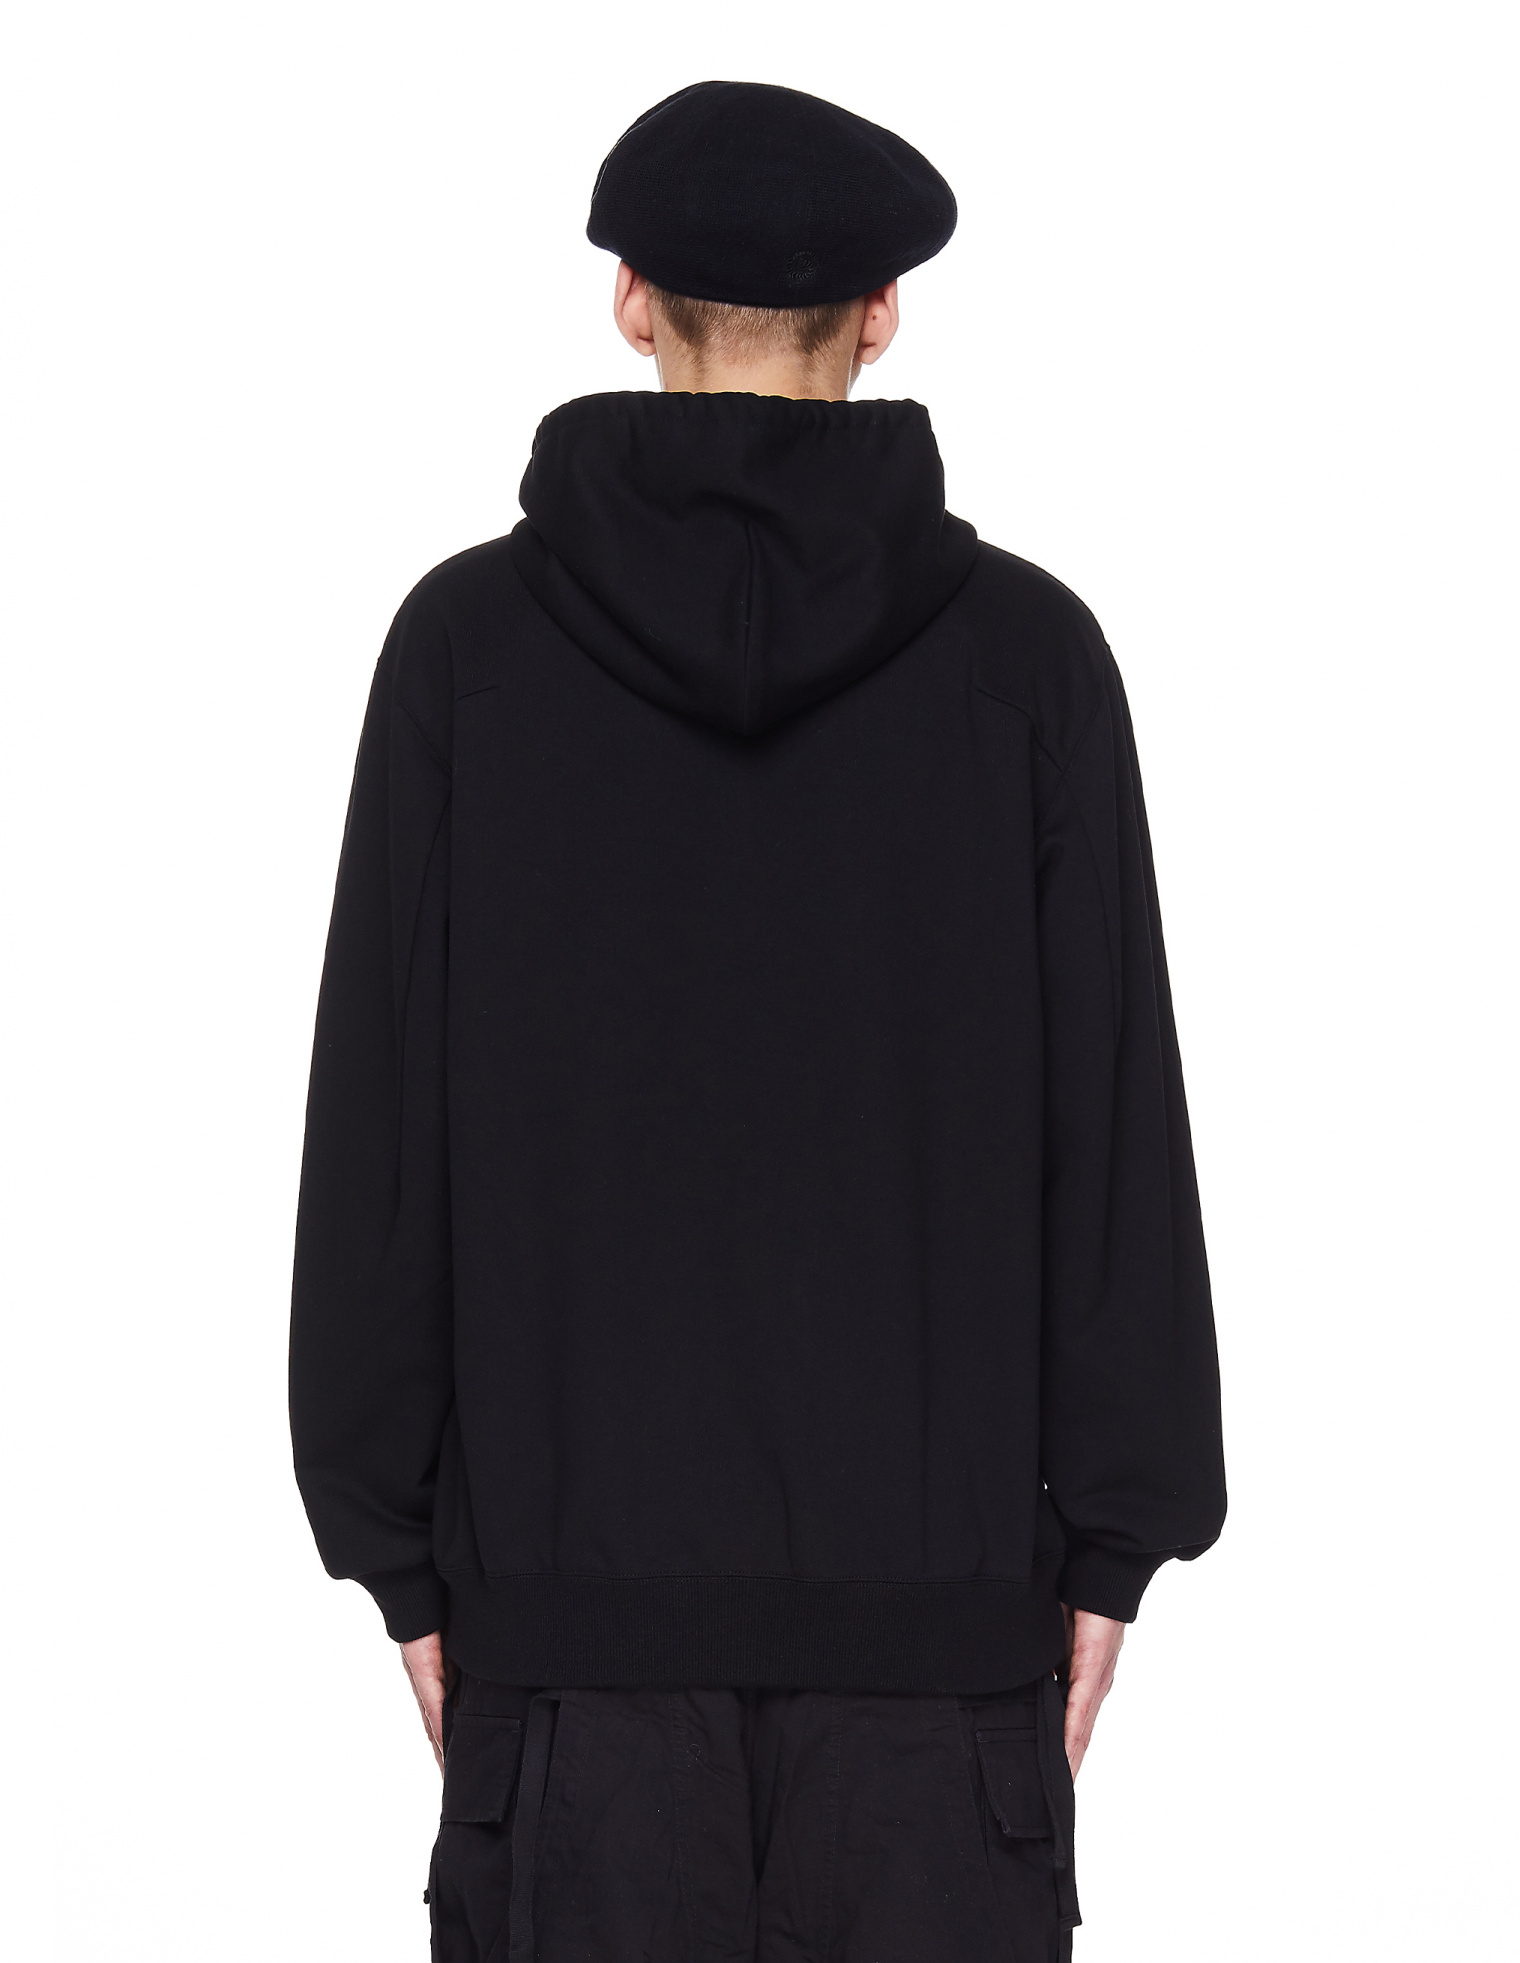 Doublet Black Cotton Embroidered Hoodie